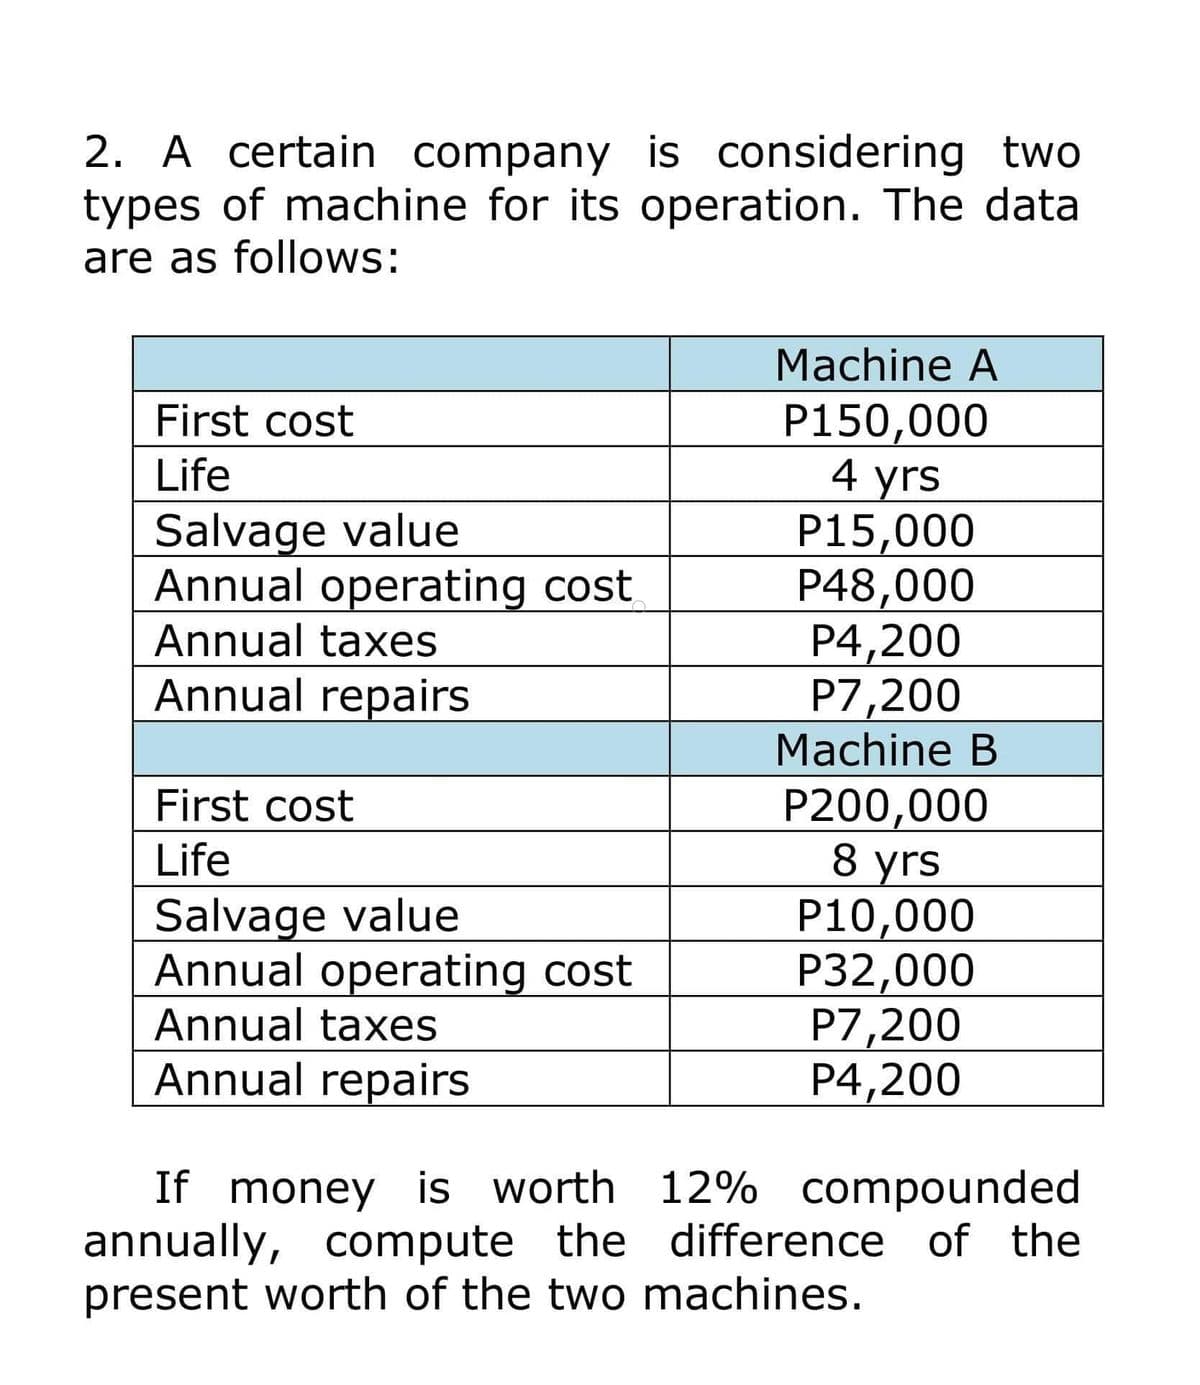 2. A certain company
is considering two
types of machine for its operation. The data
are as follows:
Machine A
First cost
P150,000
Life
4 yrs
Salvage value
P15,000
Annual operating cost
P48,000
Annual taxes
P4,200
Annual repairs
P7,200
Machine B
First cost
P200,000
Life
8 yrs
P10,000
Salvage value
Annual operating cost
P32,000
Annual taxes
P7,200
Annual repairs
P4,200
If money is worth 12% compounded
annually, compute the difference of the
present worth of the two machines.